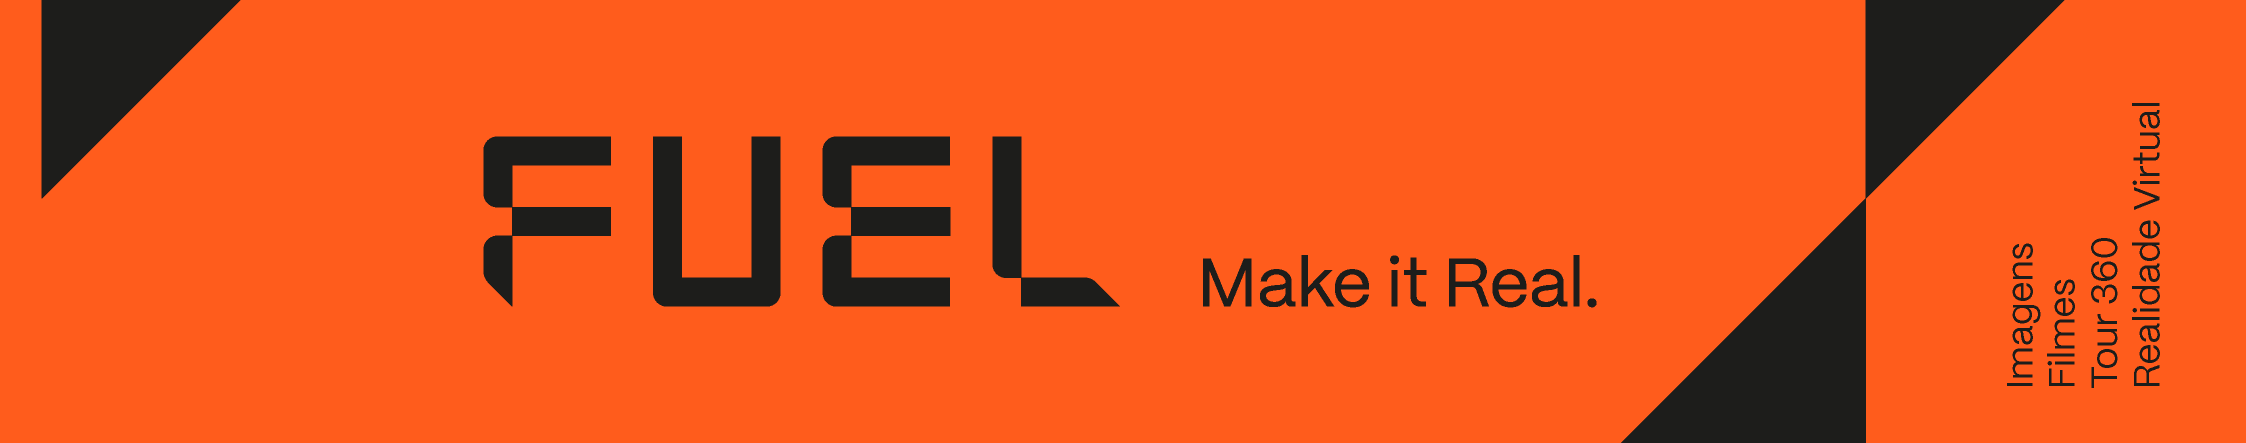 Fuel | Make it Real's profile banner